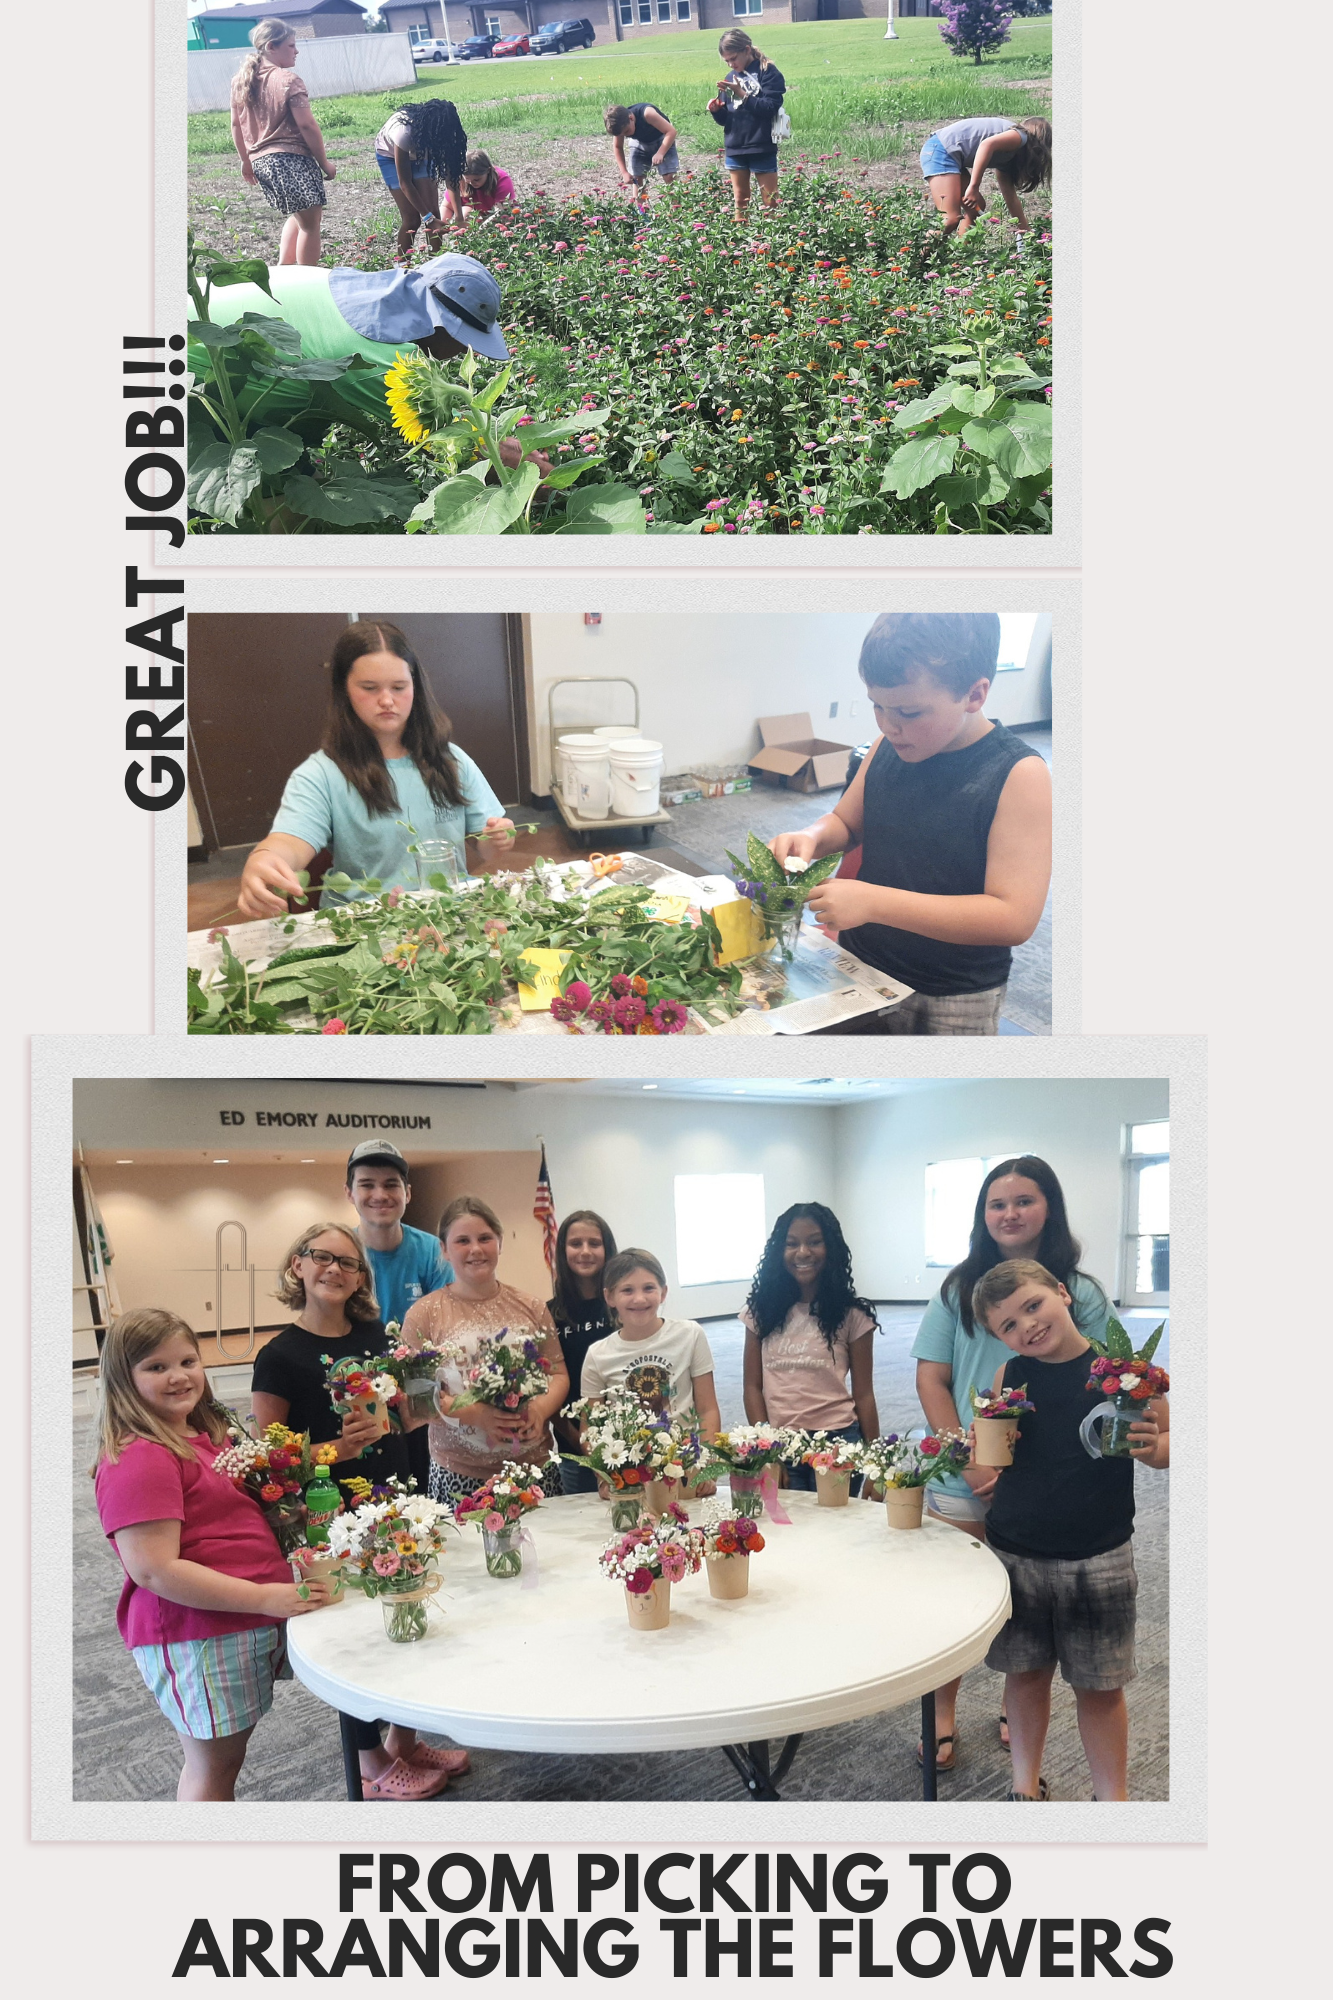 Groups of children picking flowers and arranging them in vases.